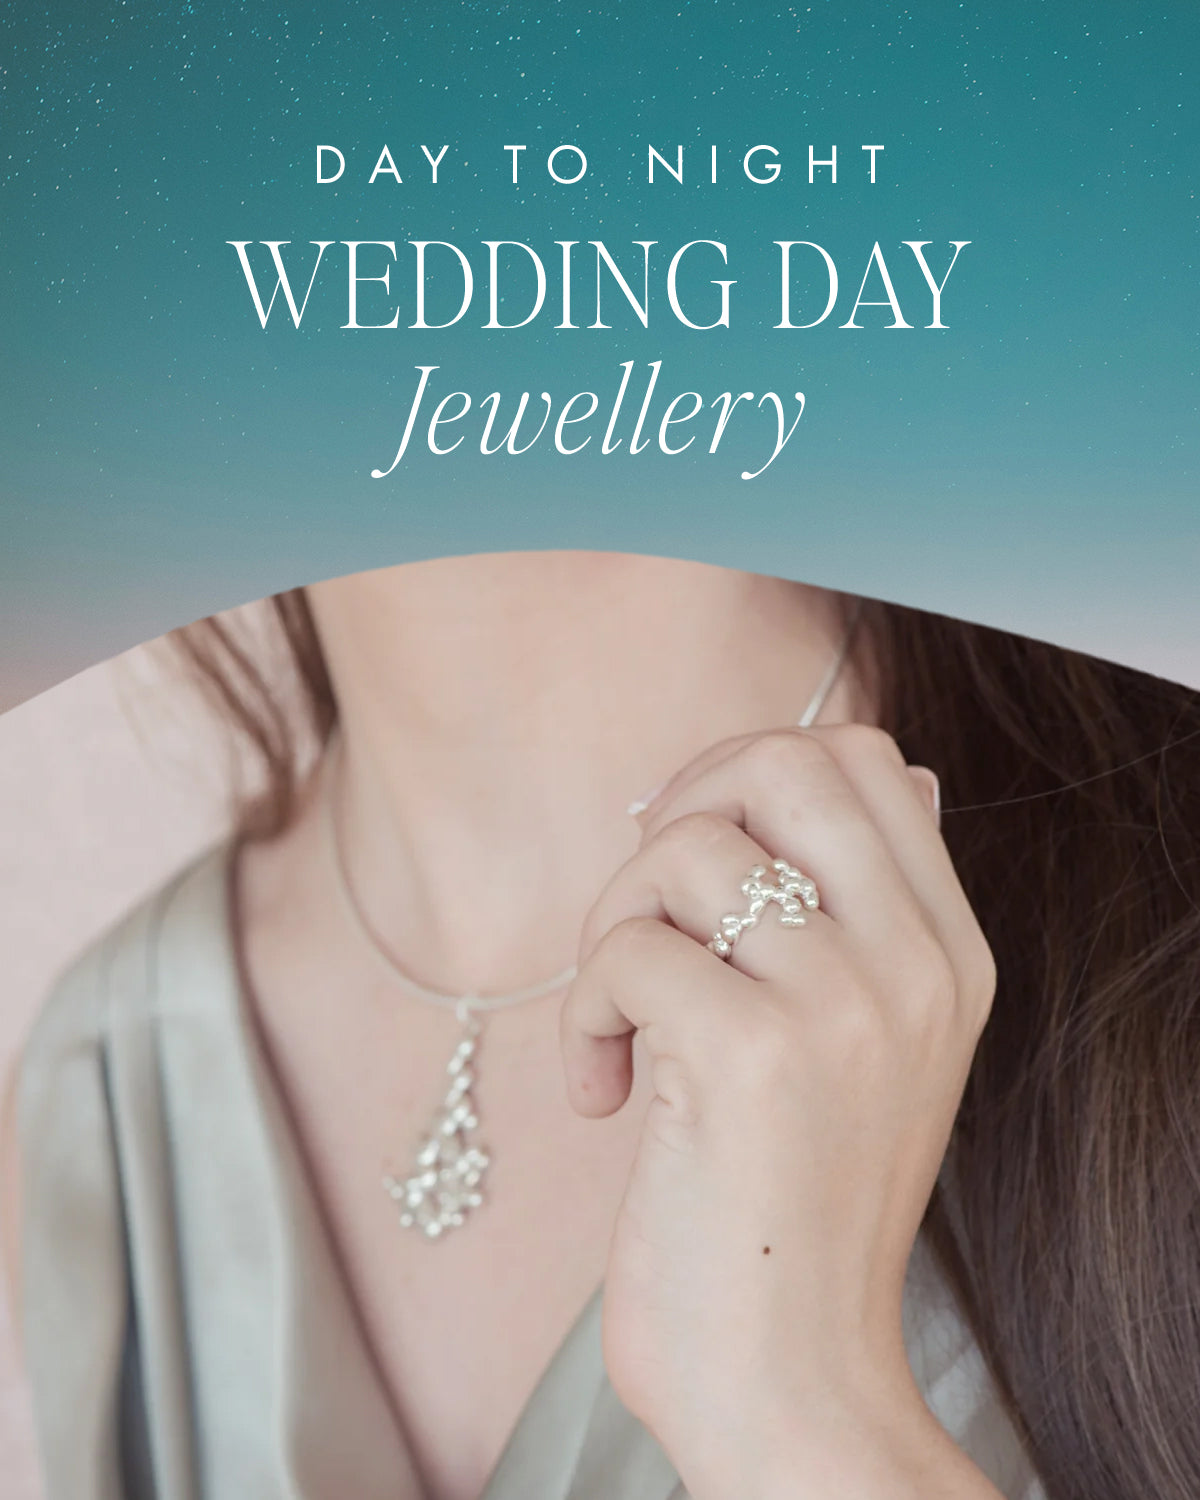 Wedding Day Jewellery : From Day To Night